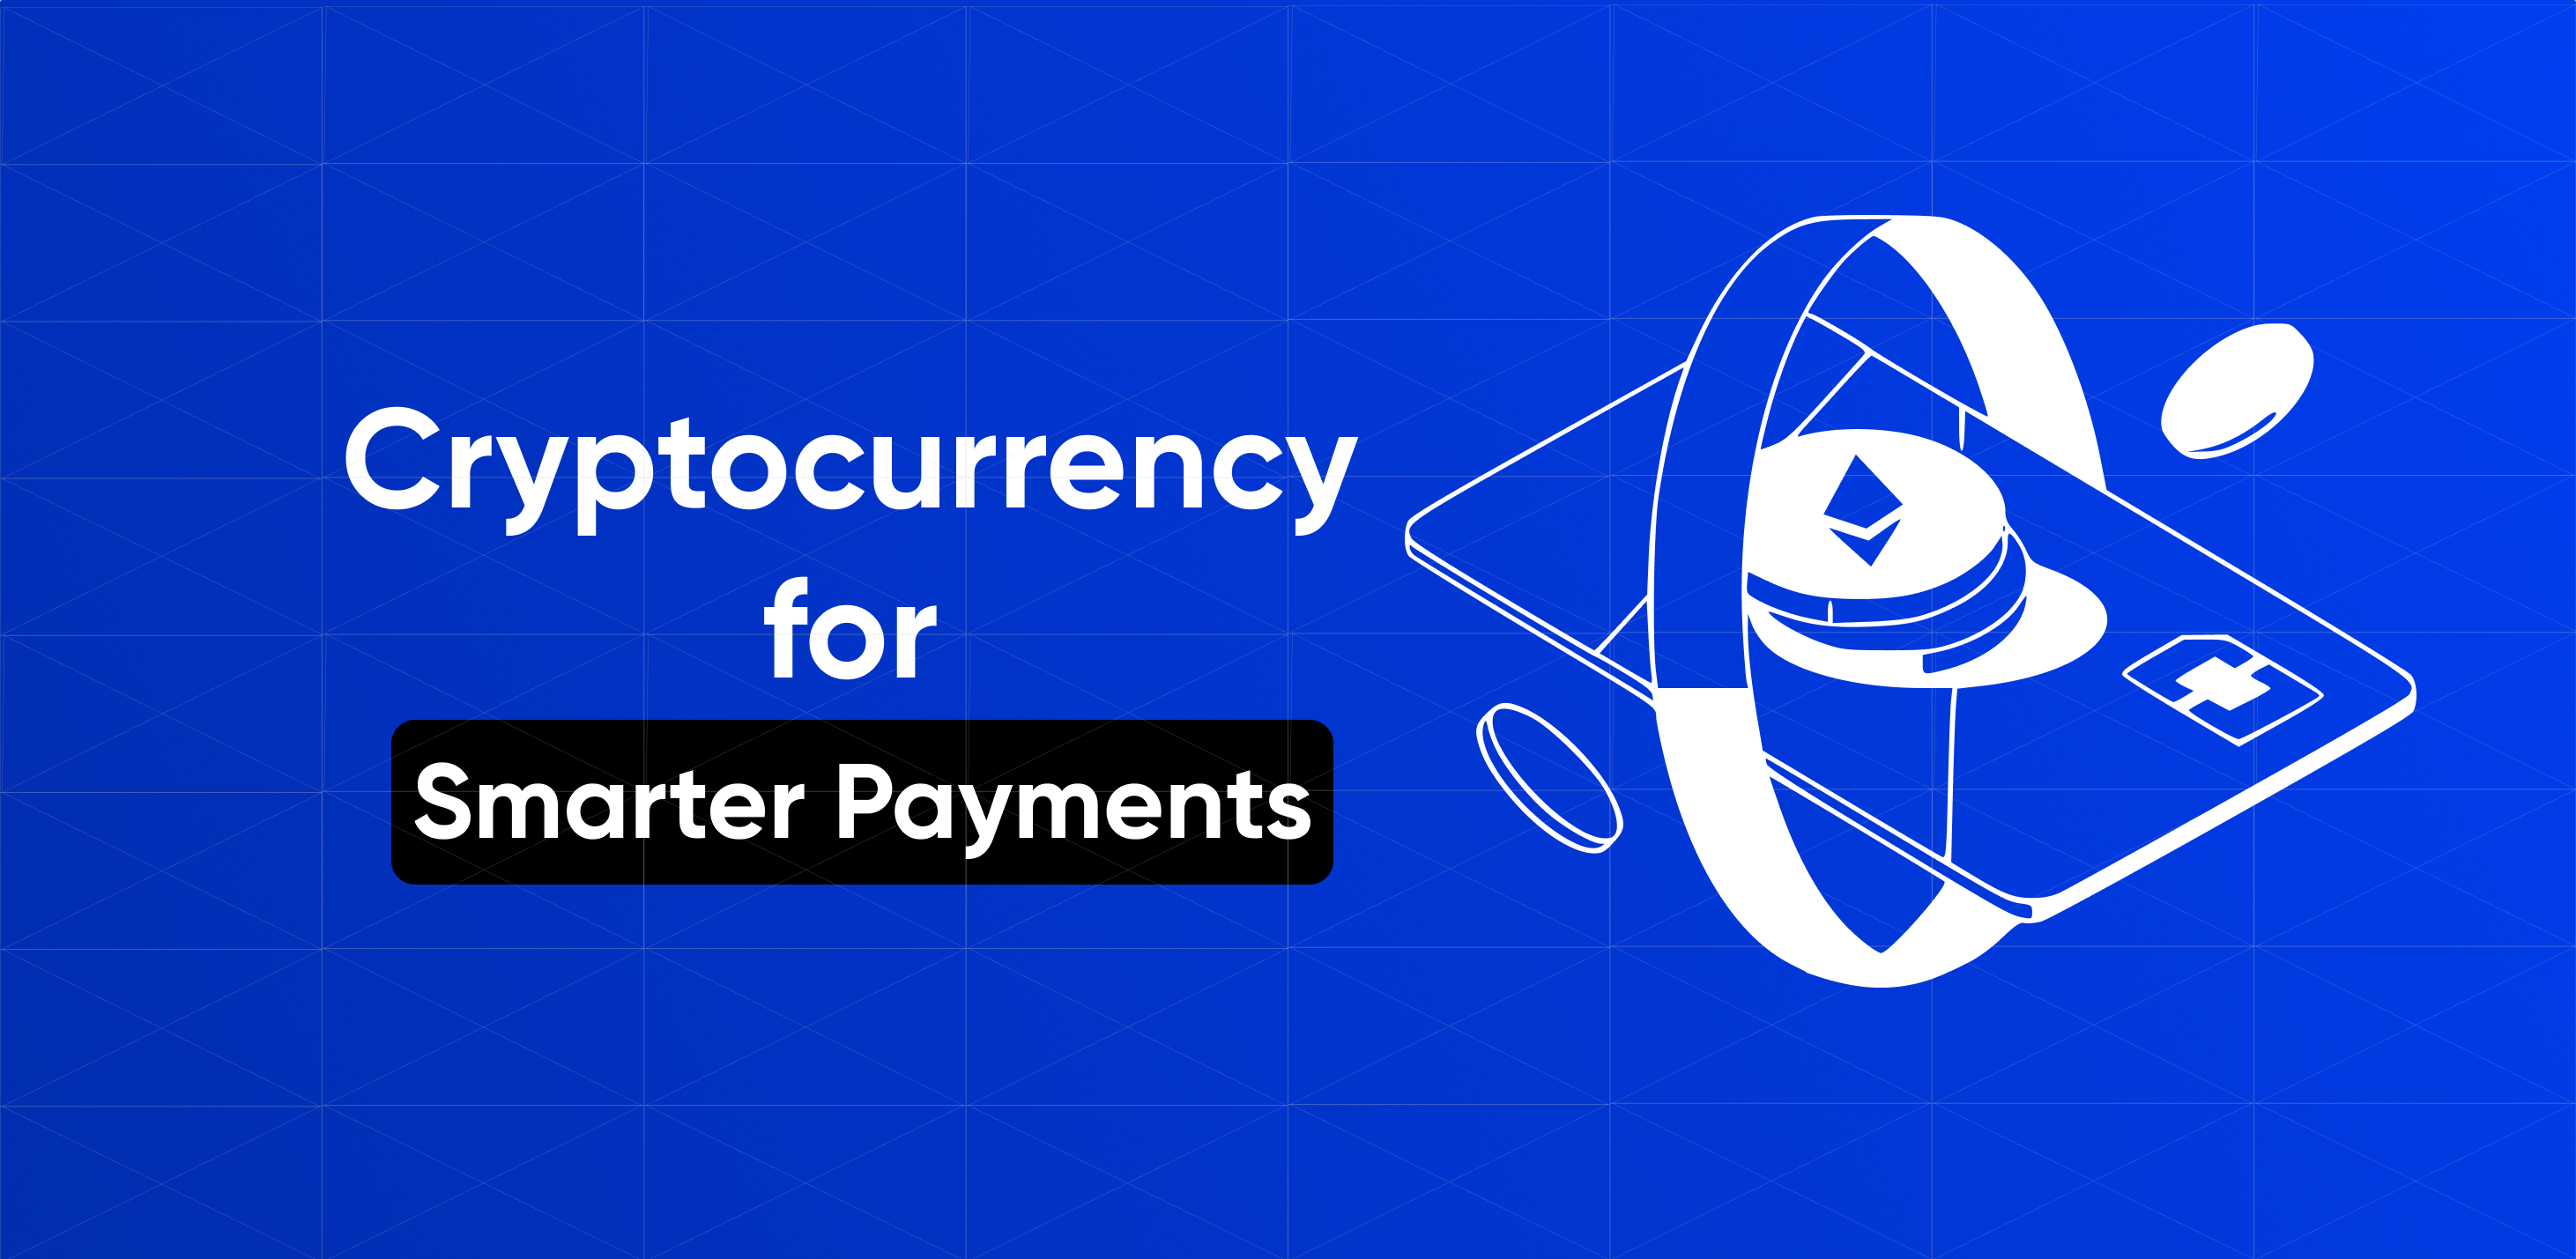 Future-Proof Your Business with Cryptocurrency for Smarter Payments